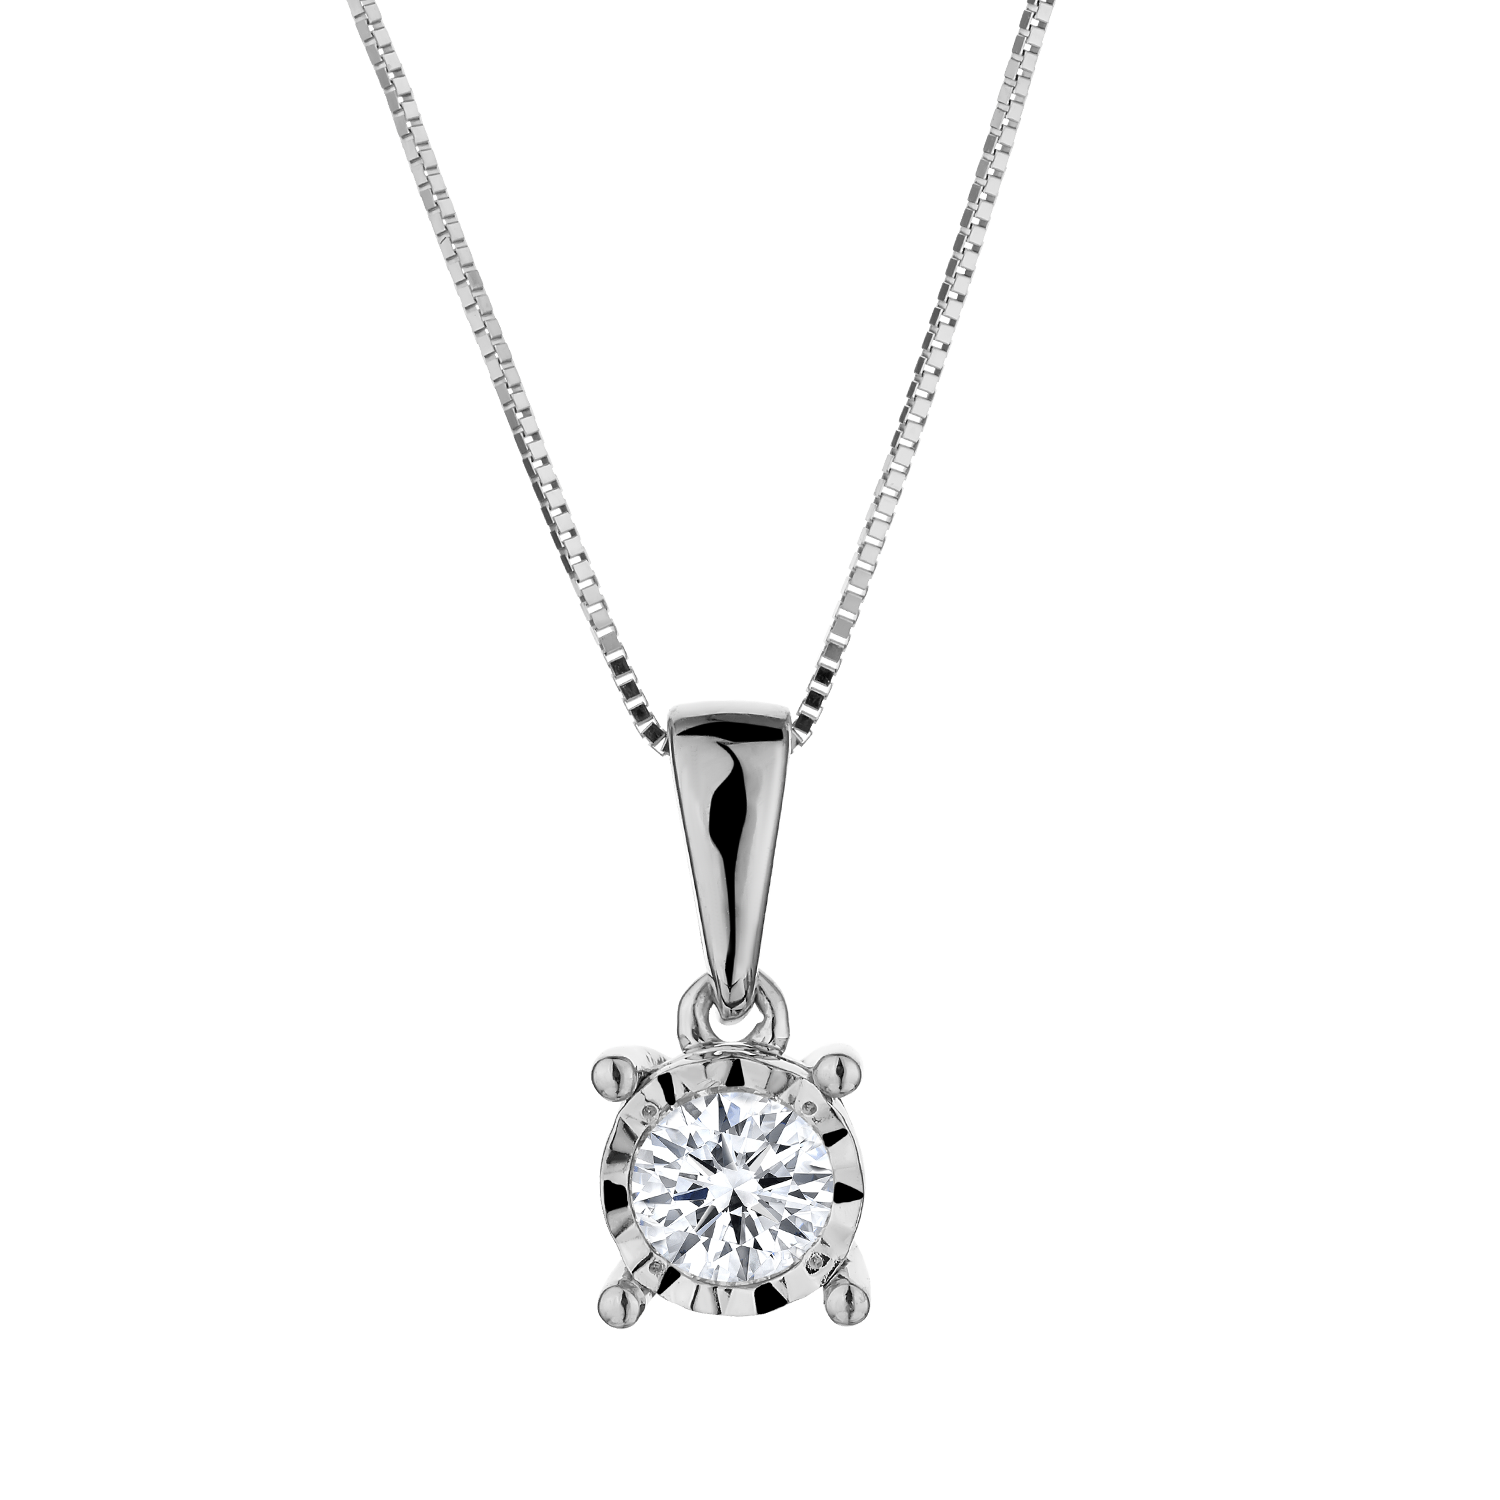 .40 CARAT DIAMOND "MIRACLE" PENDANT, 14kt WHITE GOLD, WITH 10kt WHITE GOLD CHAIN....................NOW